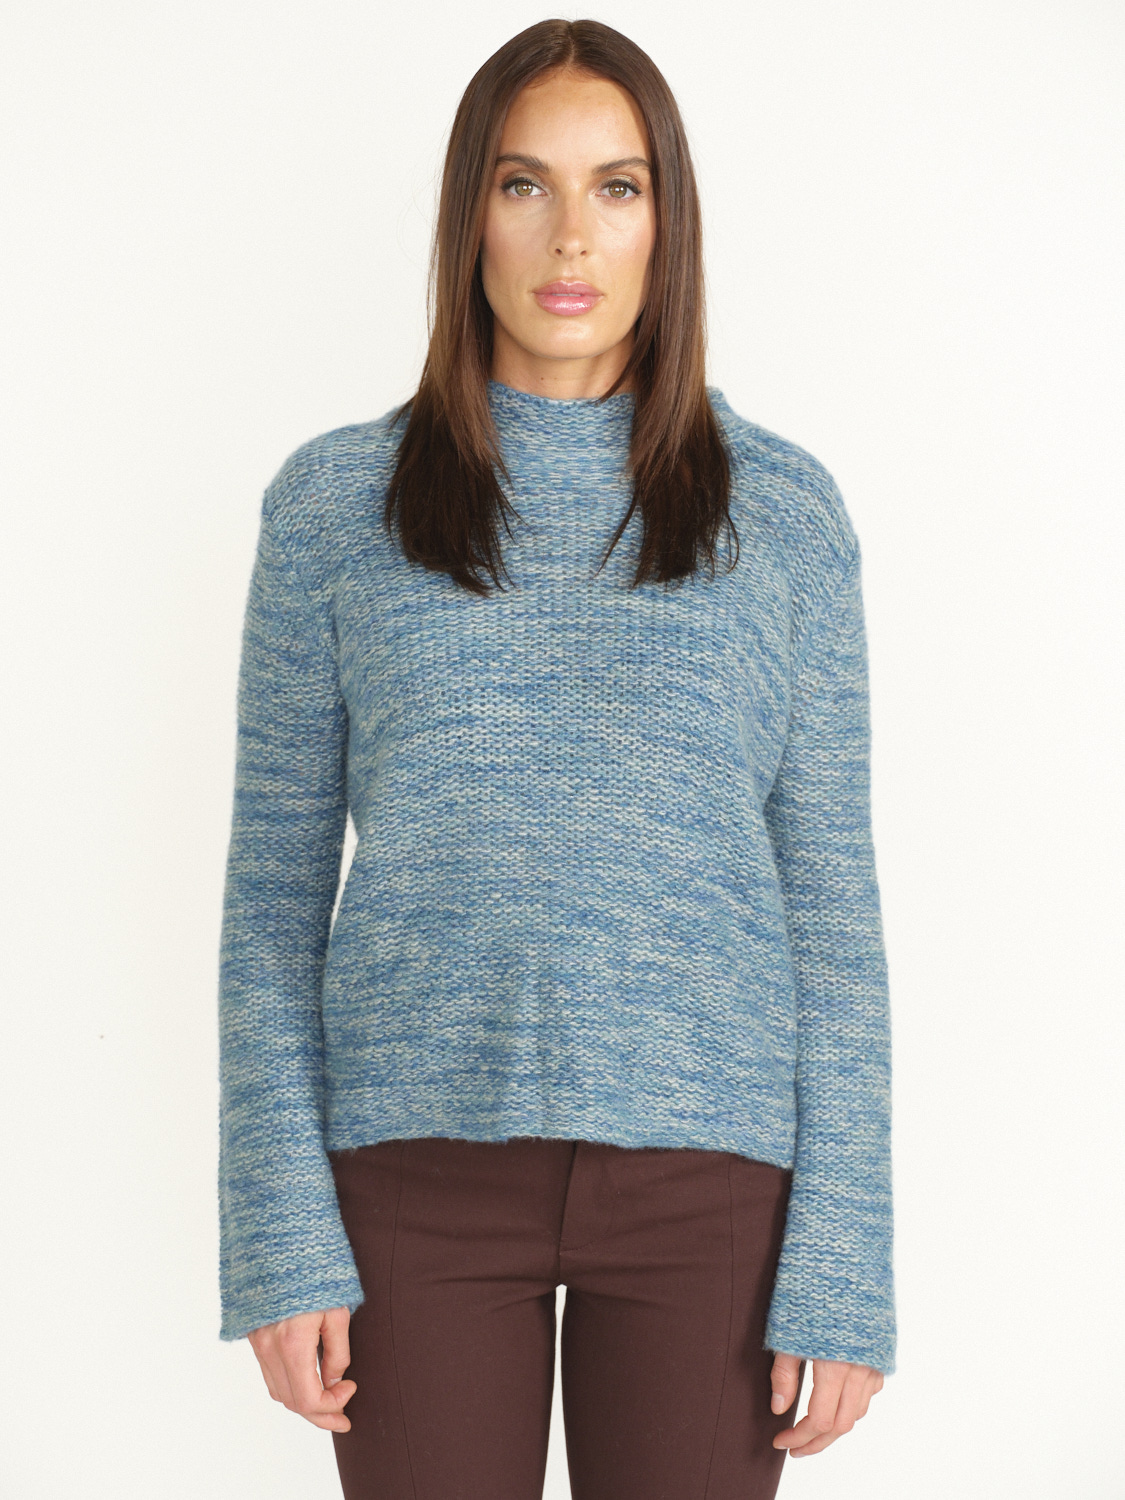 LU Ren Cachi - knitted sweater with stand-up collar in cashmere blue S